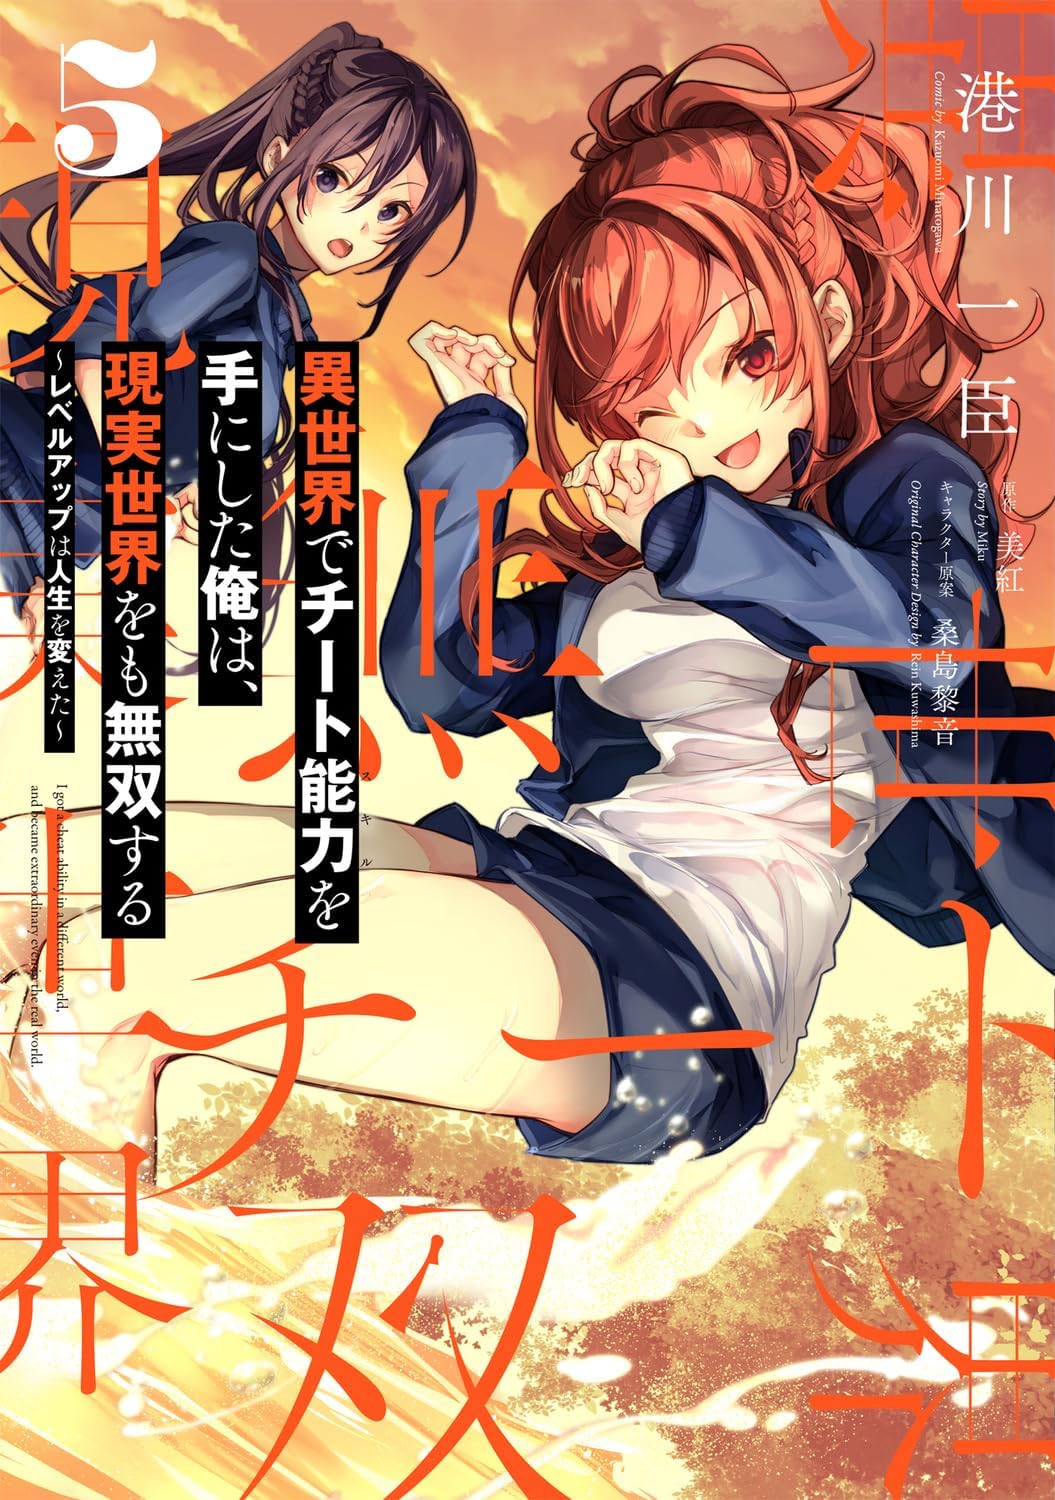 A new anime adaptation is in the works for 'I Got a Cheat Skill in